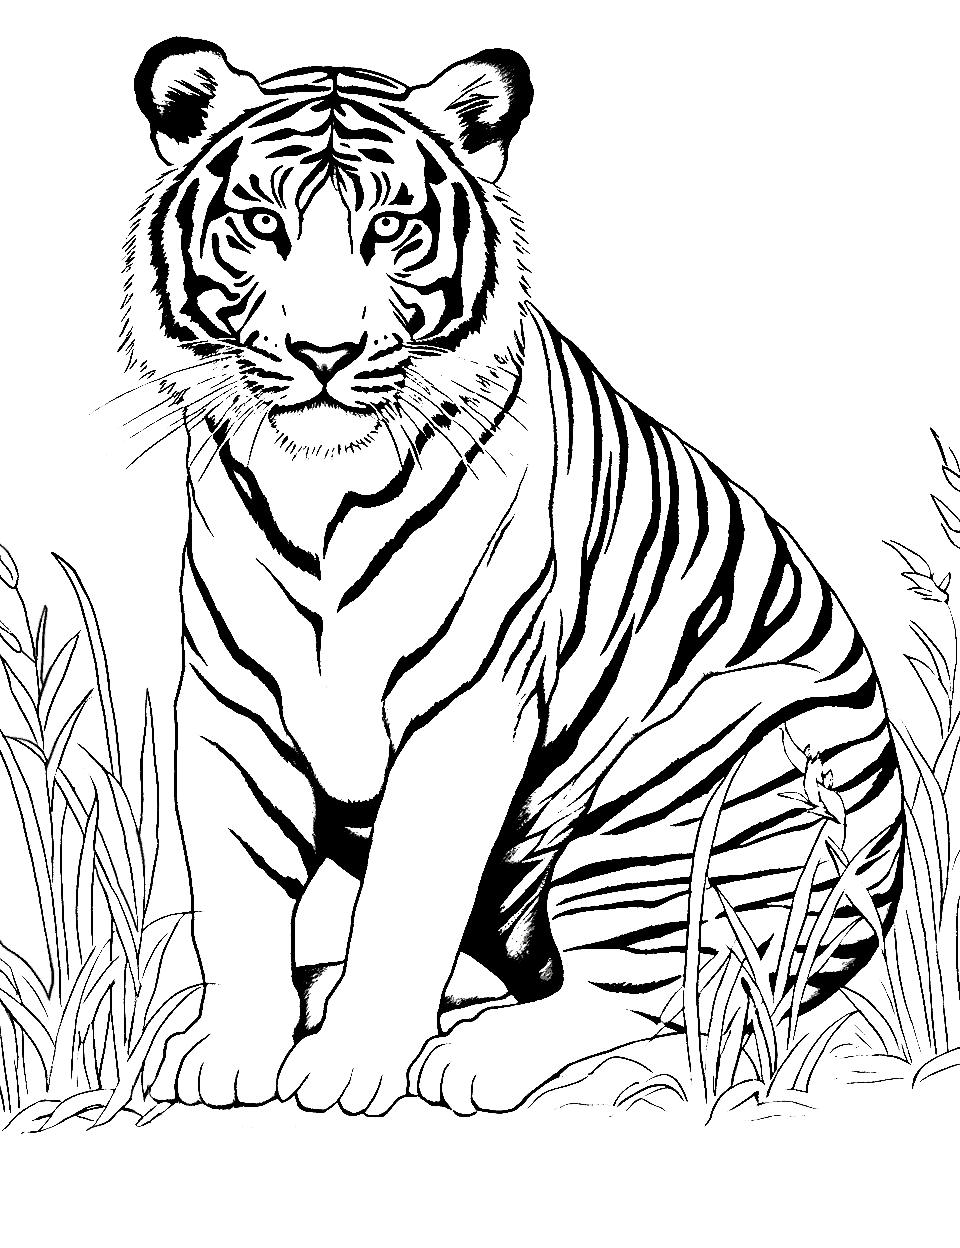 Tiger coloring pages free printable sheets